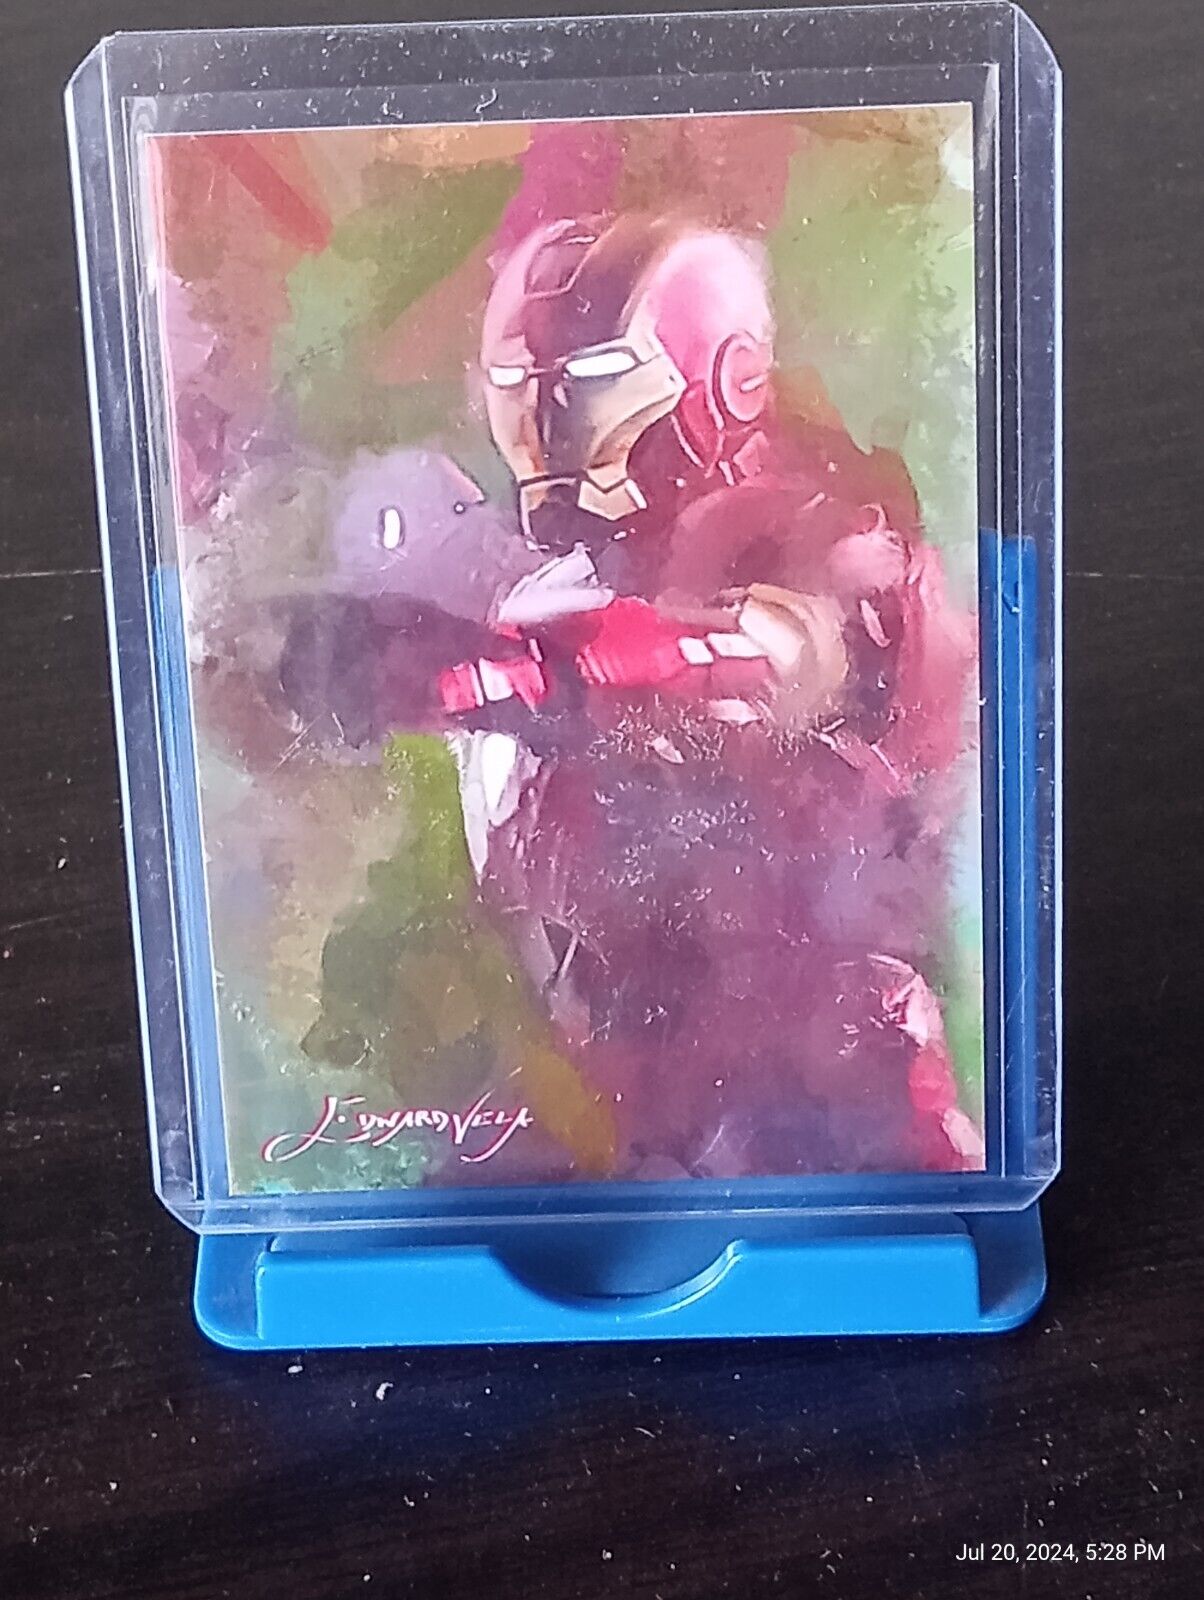 M16B Marvel Iron Man #5 - ACEO Art Card Signed by Artist 50/50